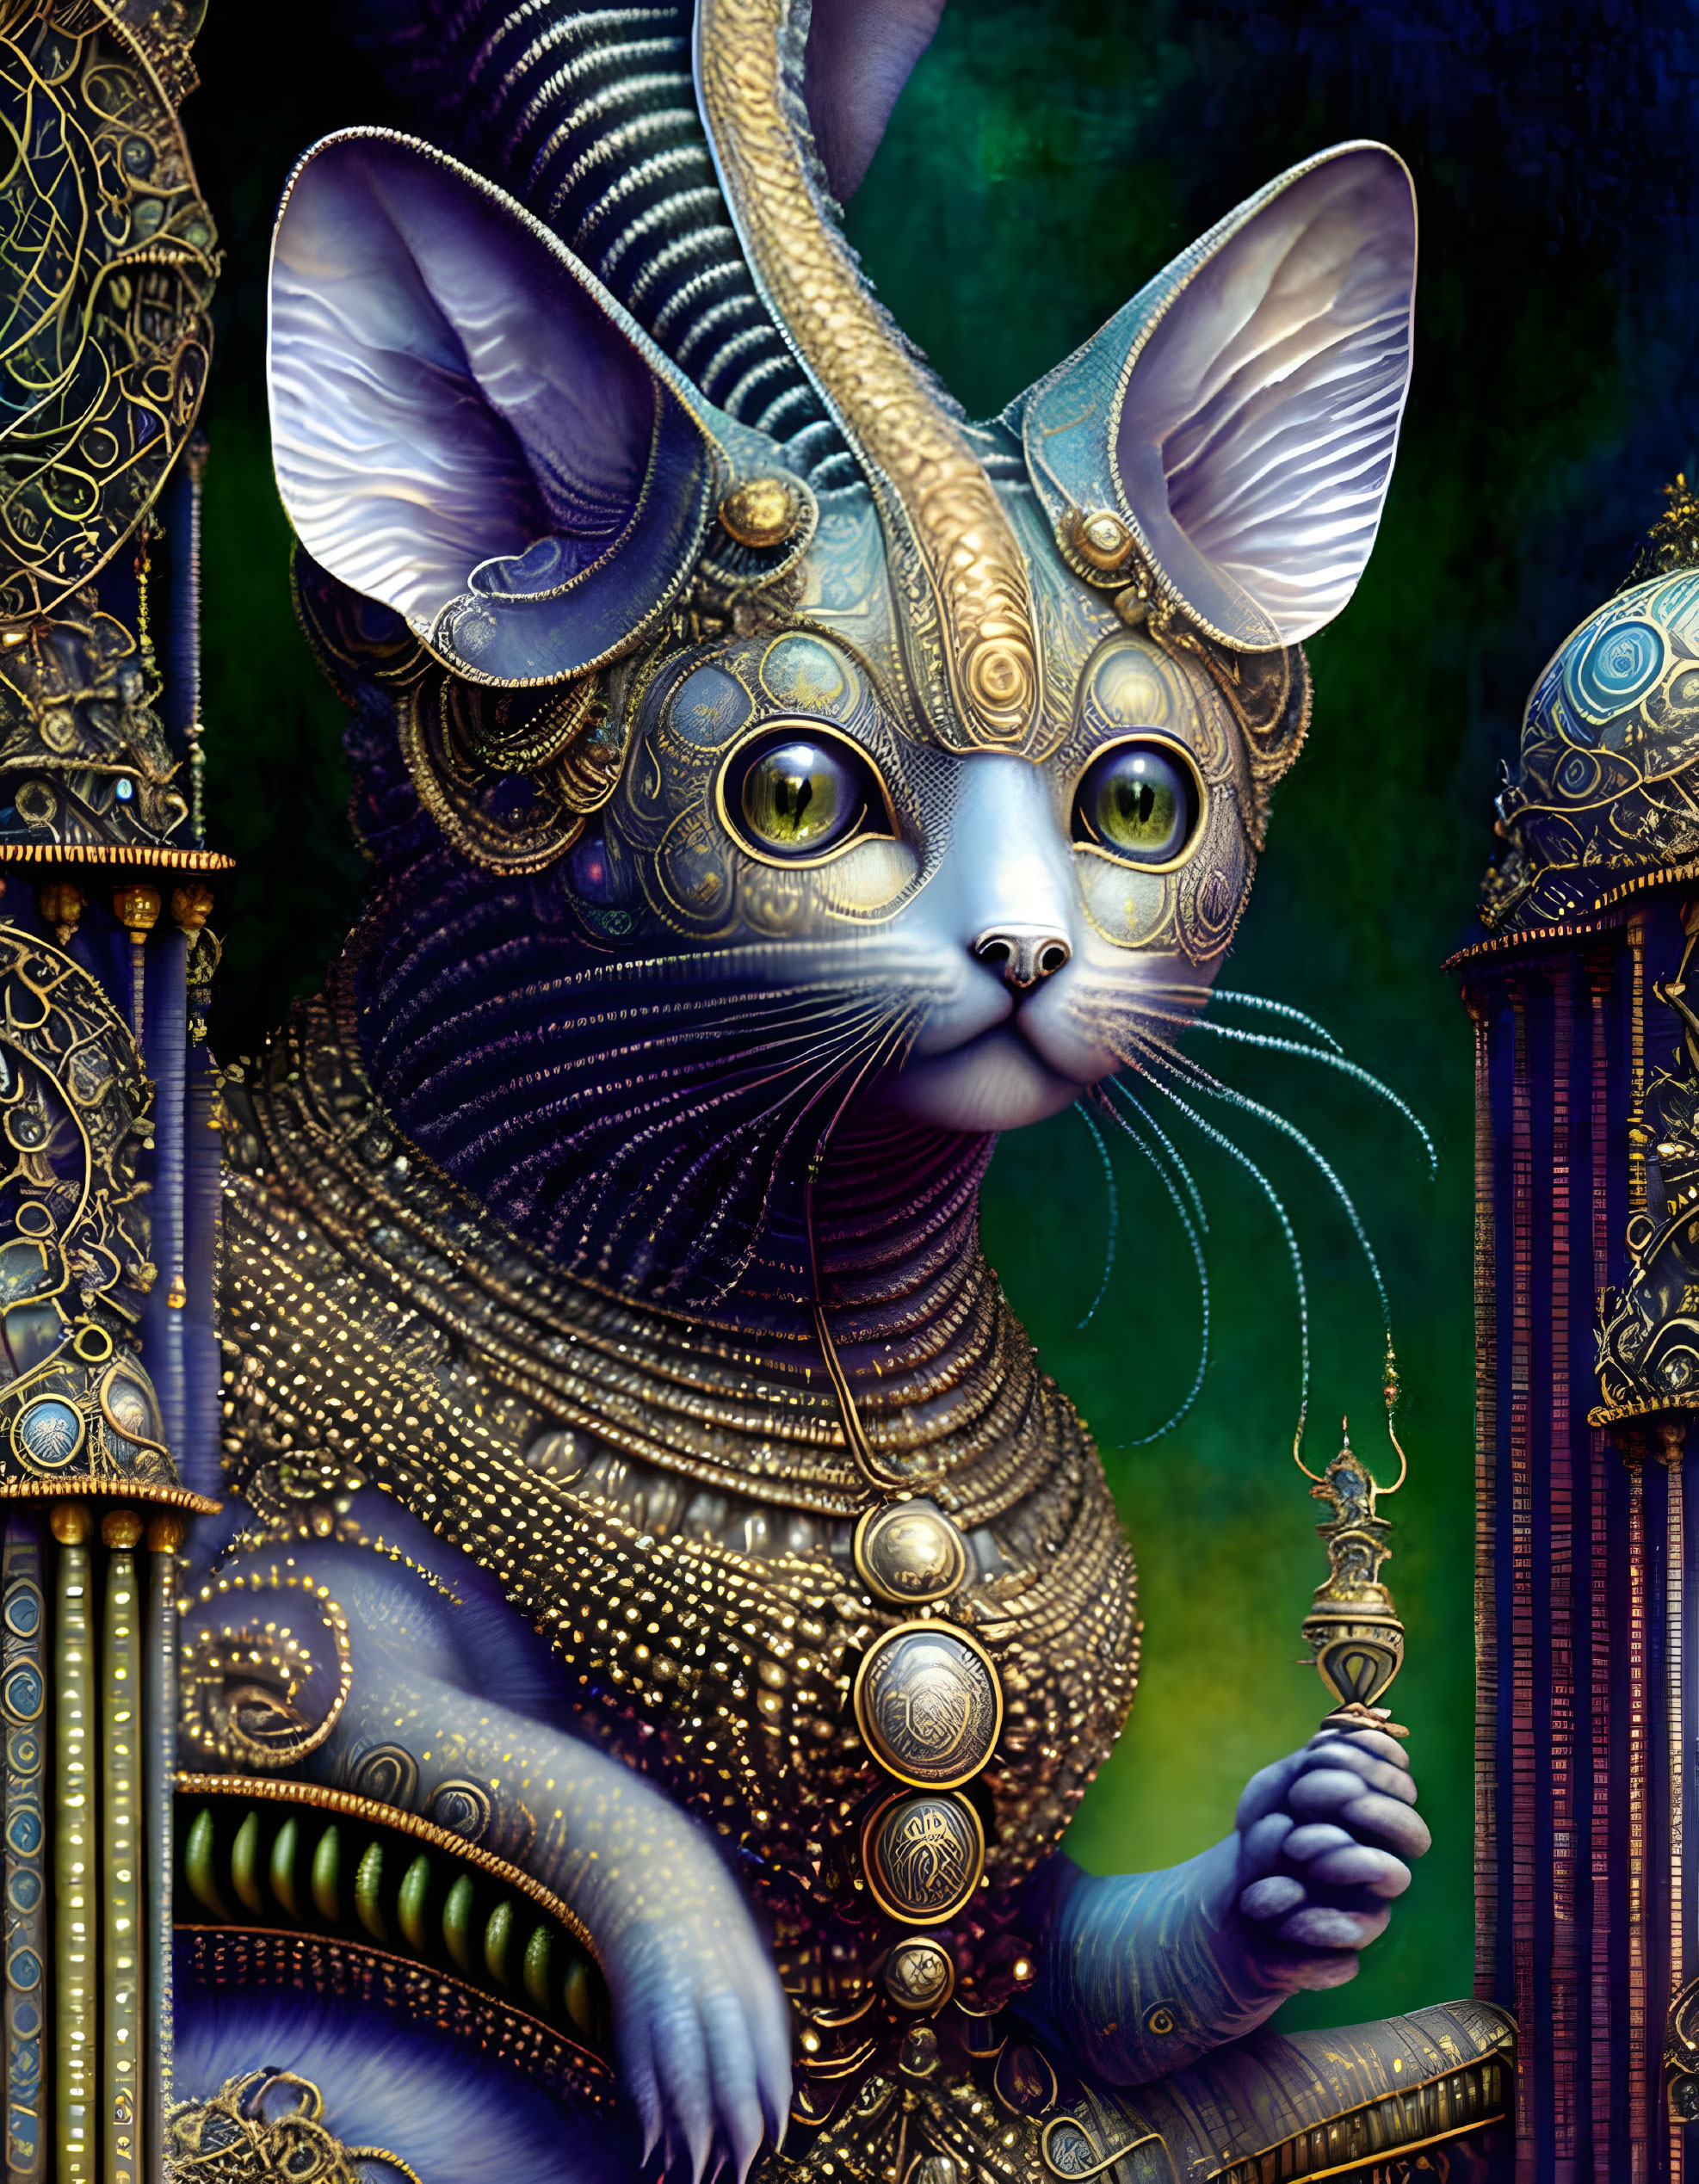 Ornately adorned cat in gold armor with scepter